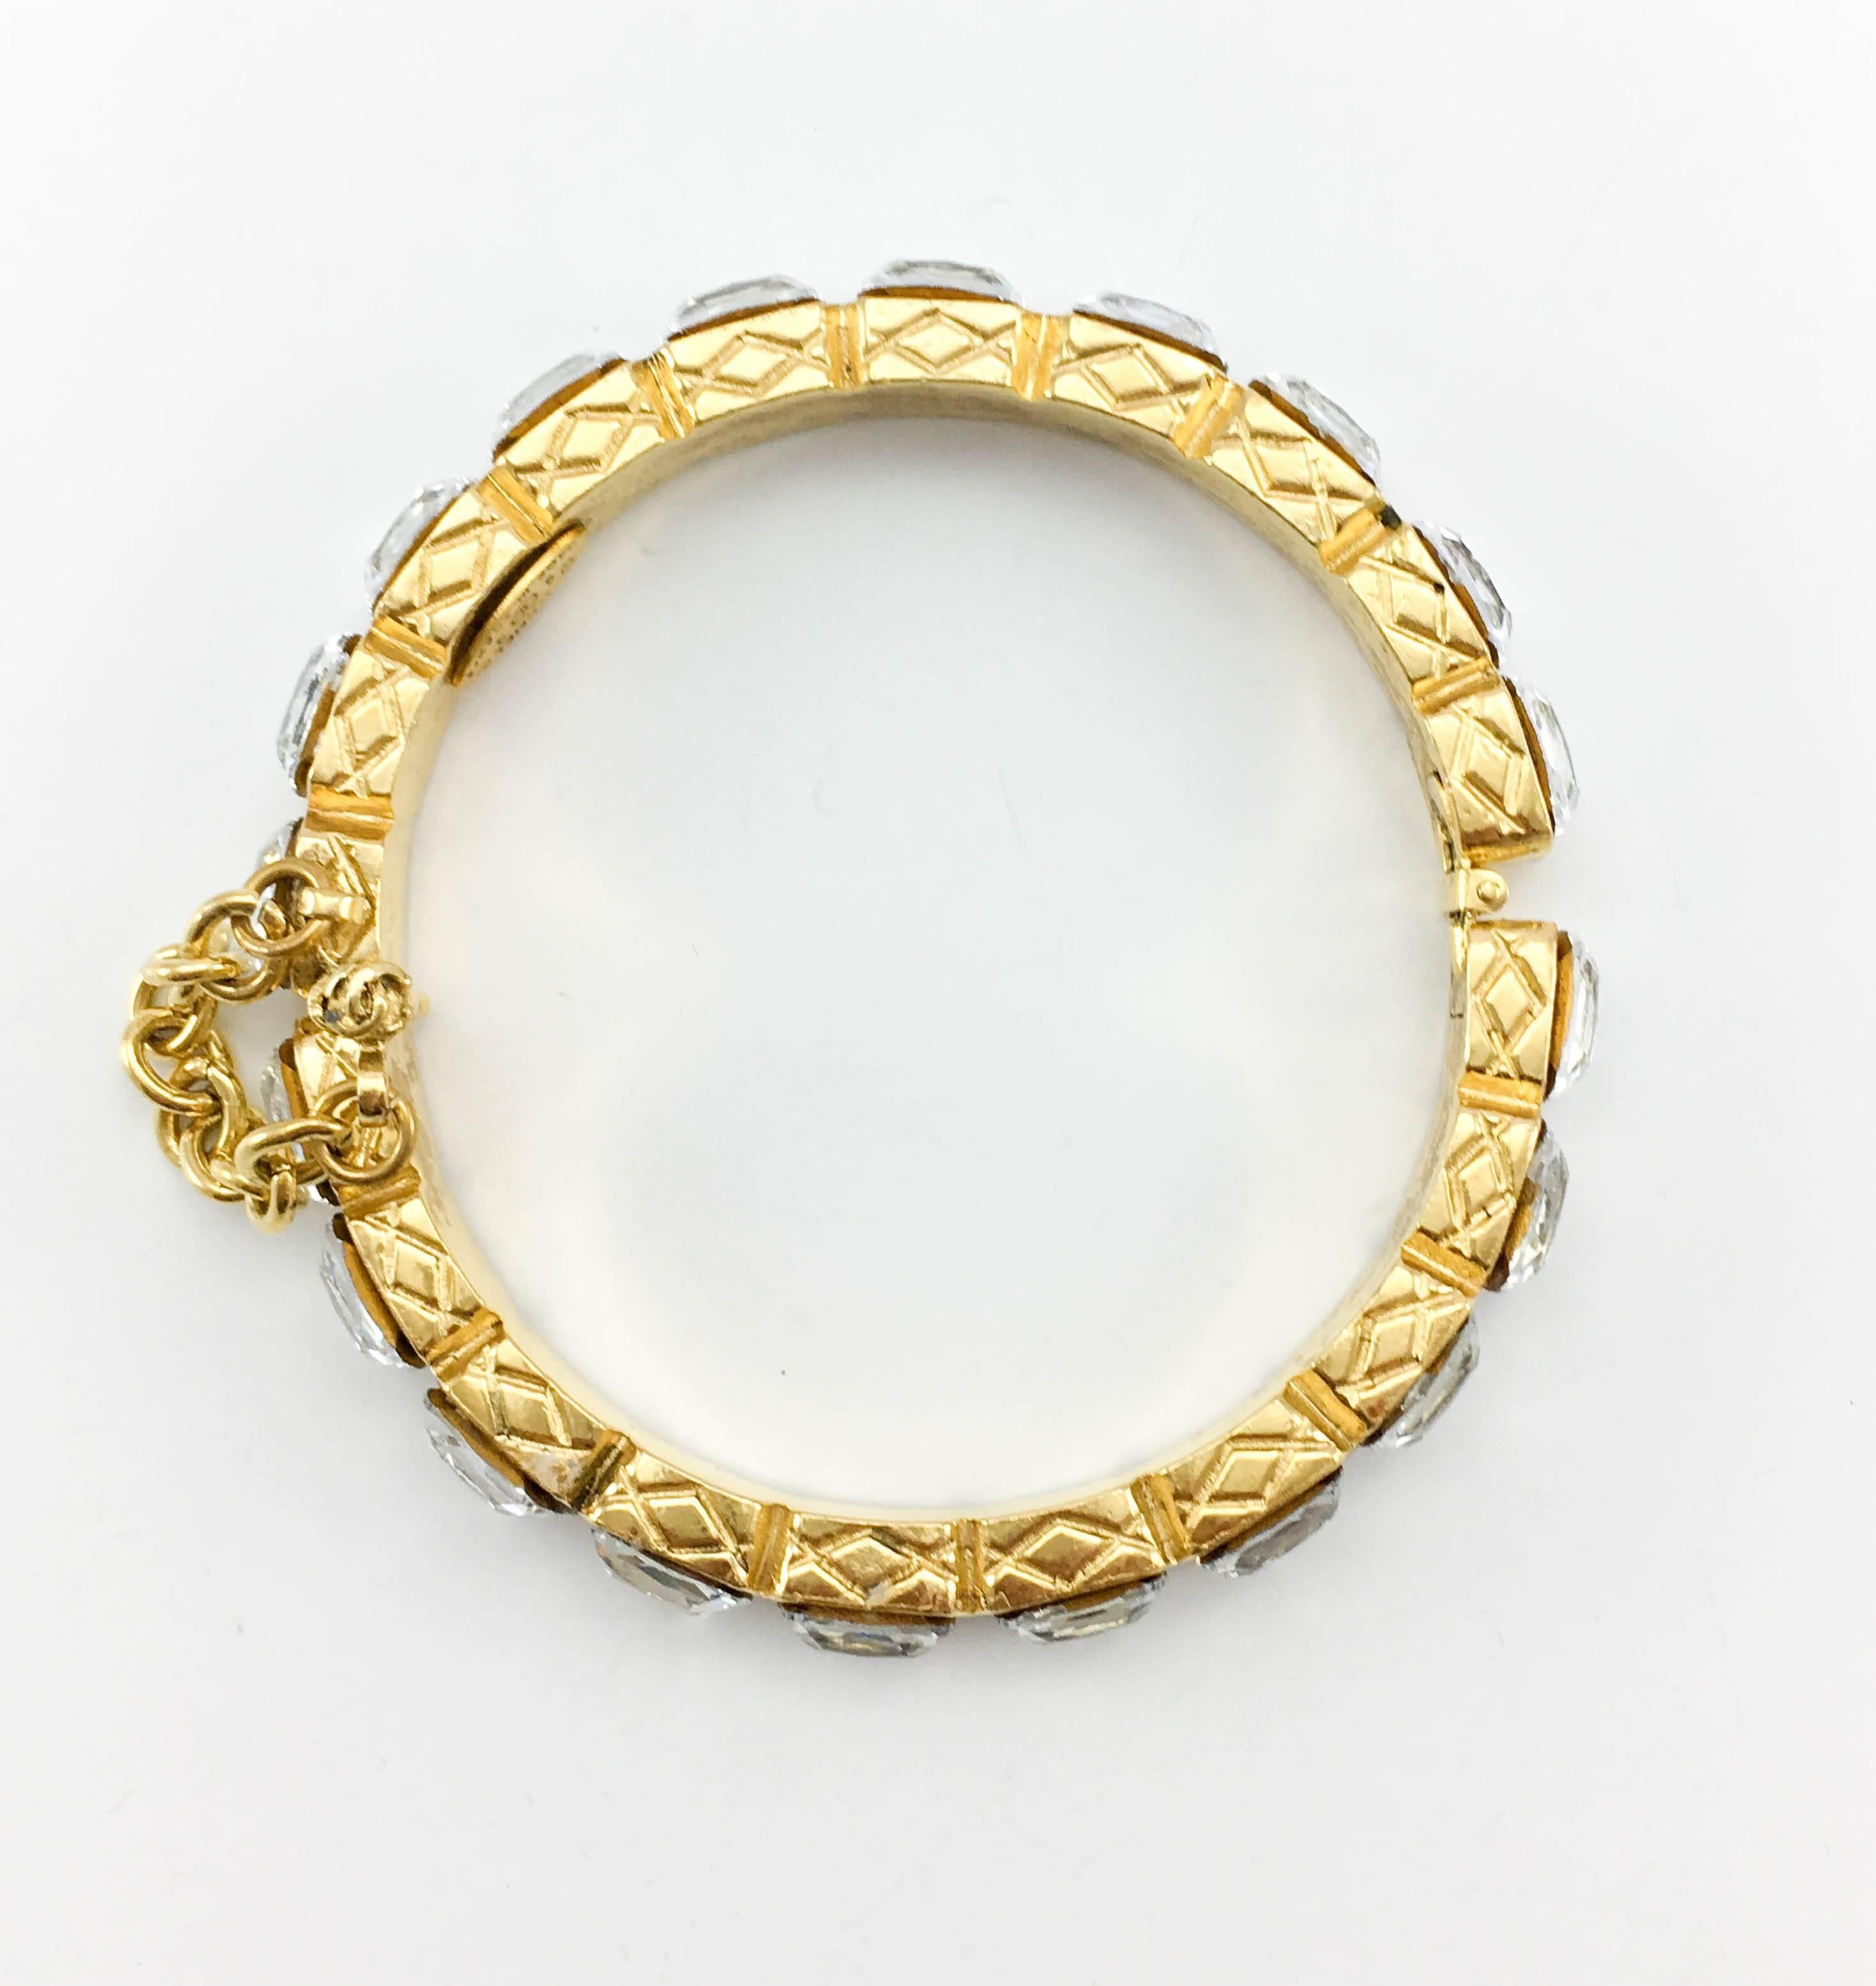 1986 Chanel Gold-Plated Quilted Bracelet Embellished With Crystals 2